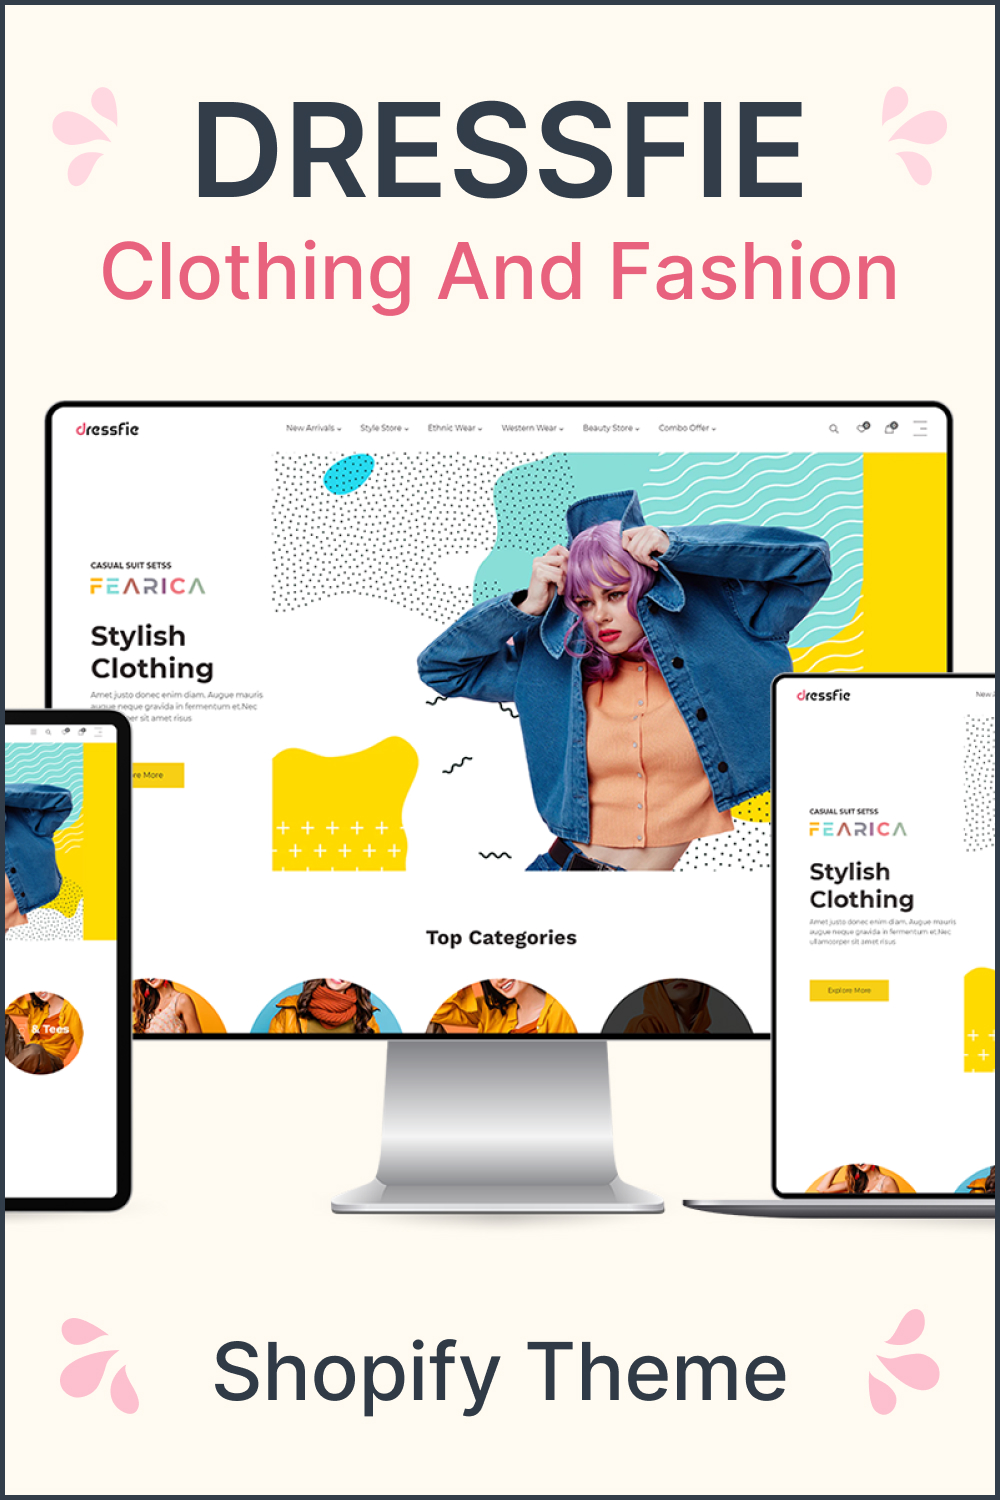 Pinterest illustrations of dressfie clothing and fashion shopify theme.